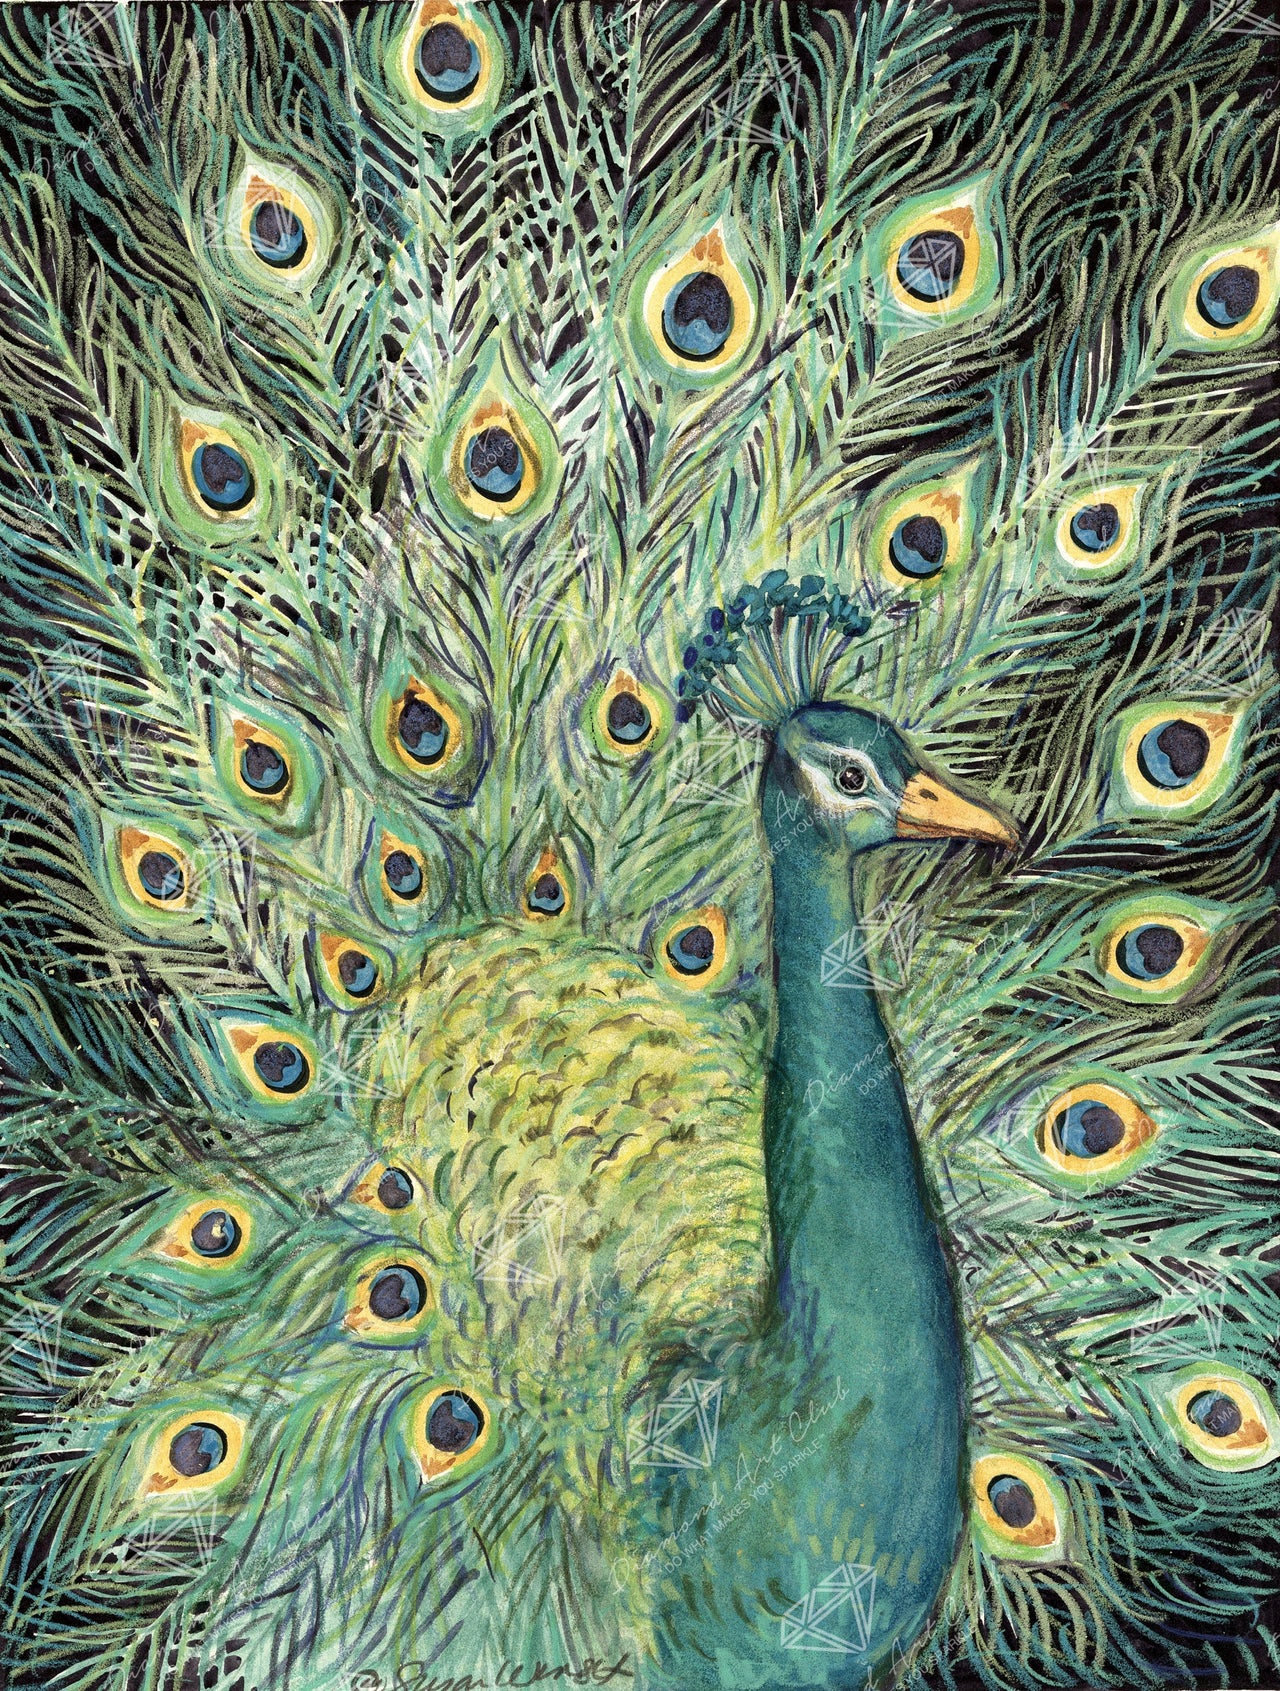 Diamond Painting Peacock 22" x 29″ (56cm x 74cm) / Square with 38 Colors including 2 ABs / 64,531